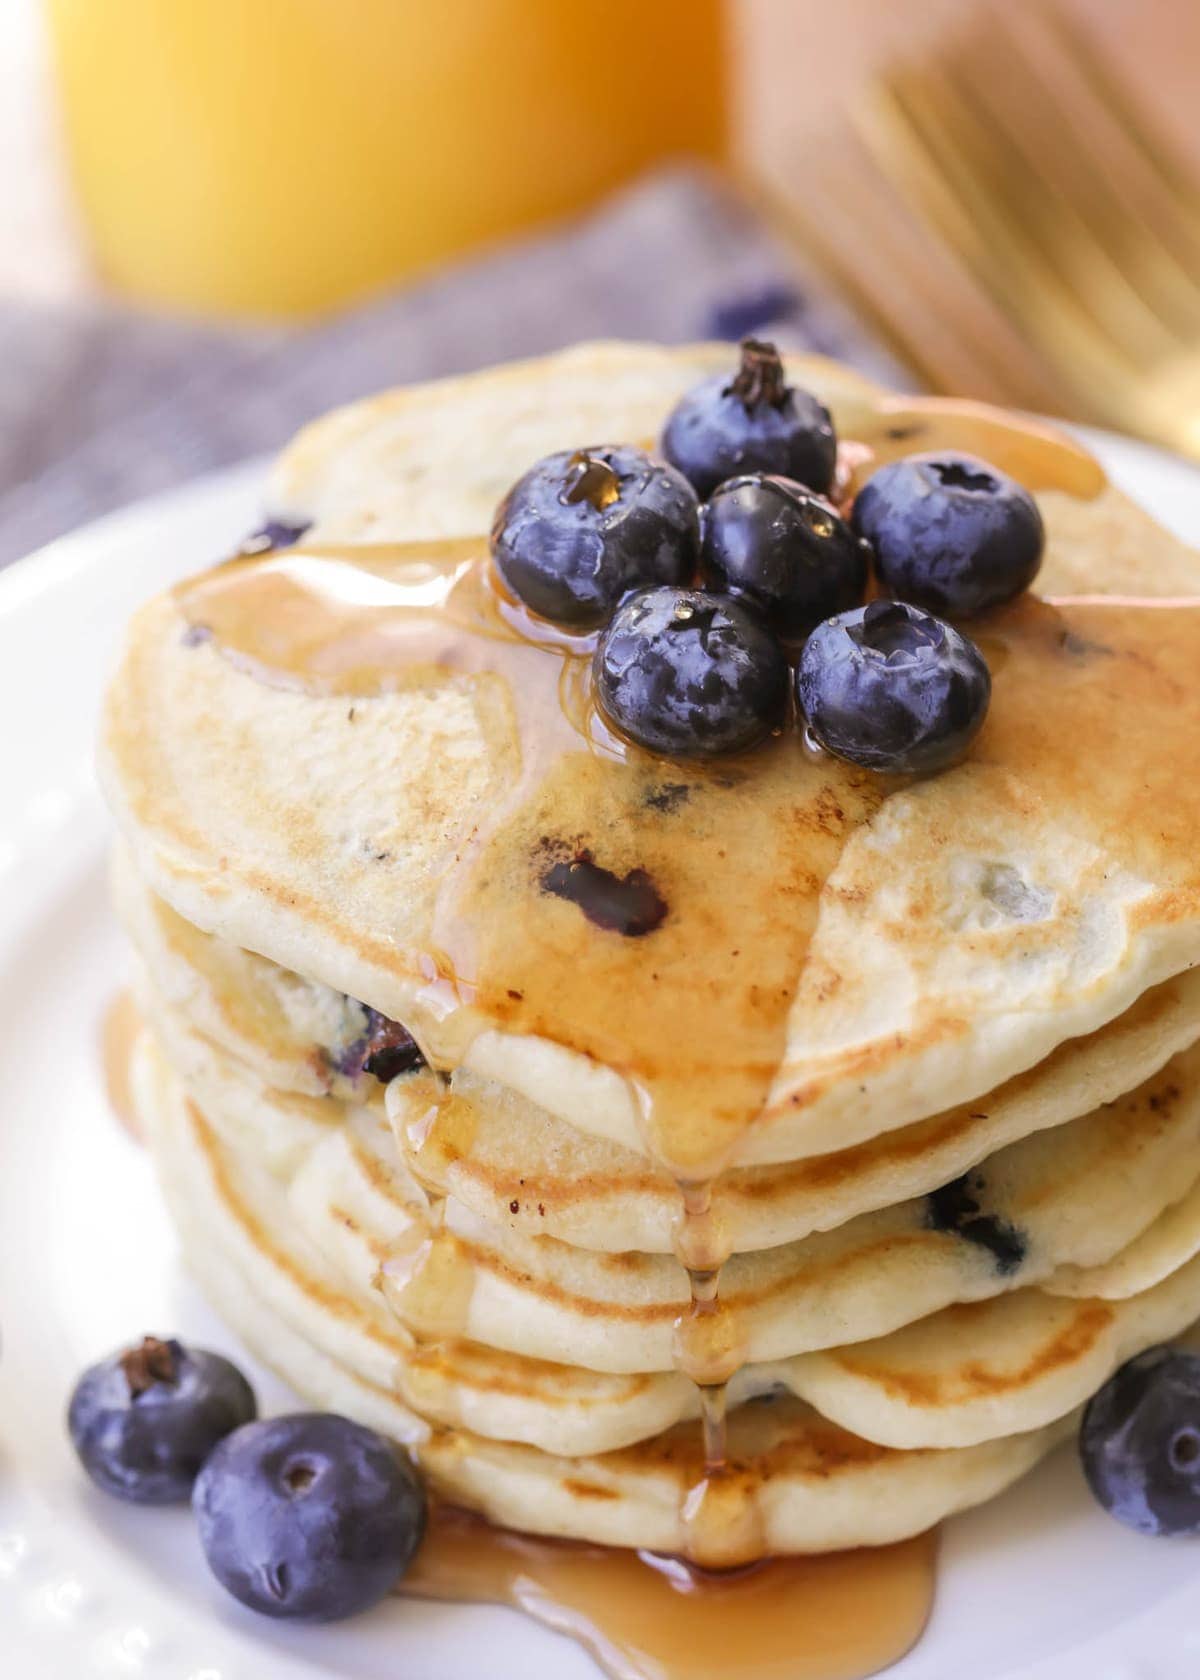 Blueberry Pancakes {Made with Fresh Blueberries!} | Lil' Luna